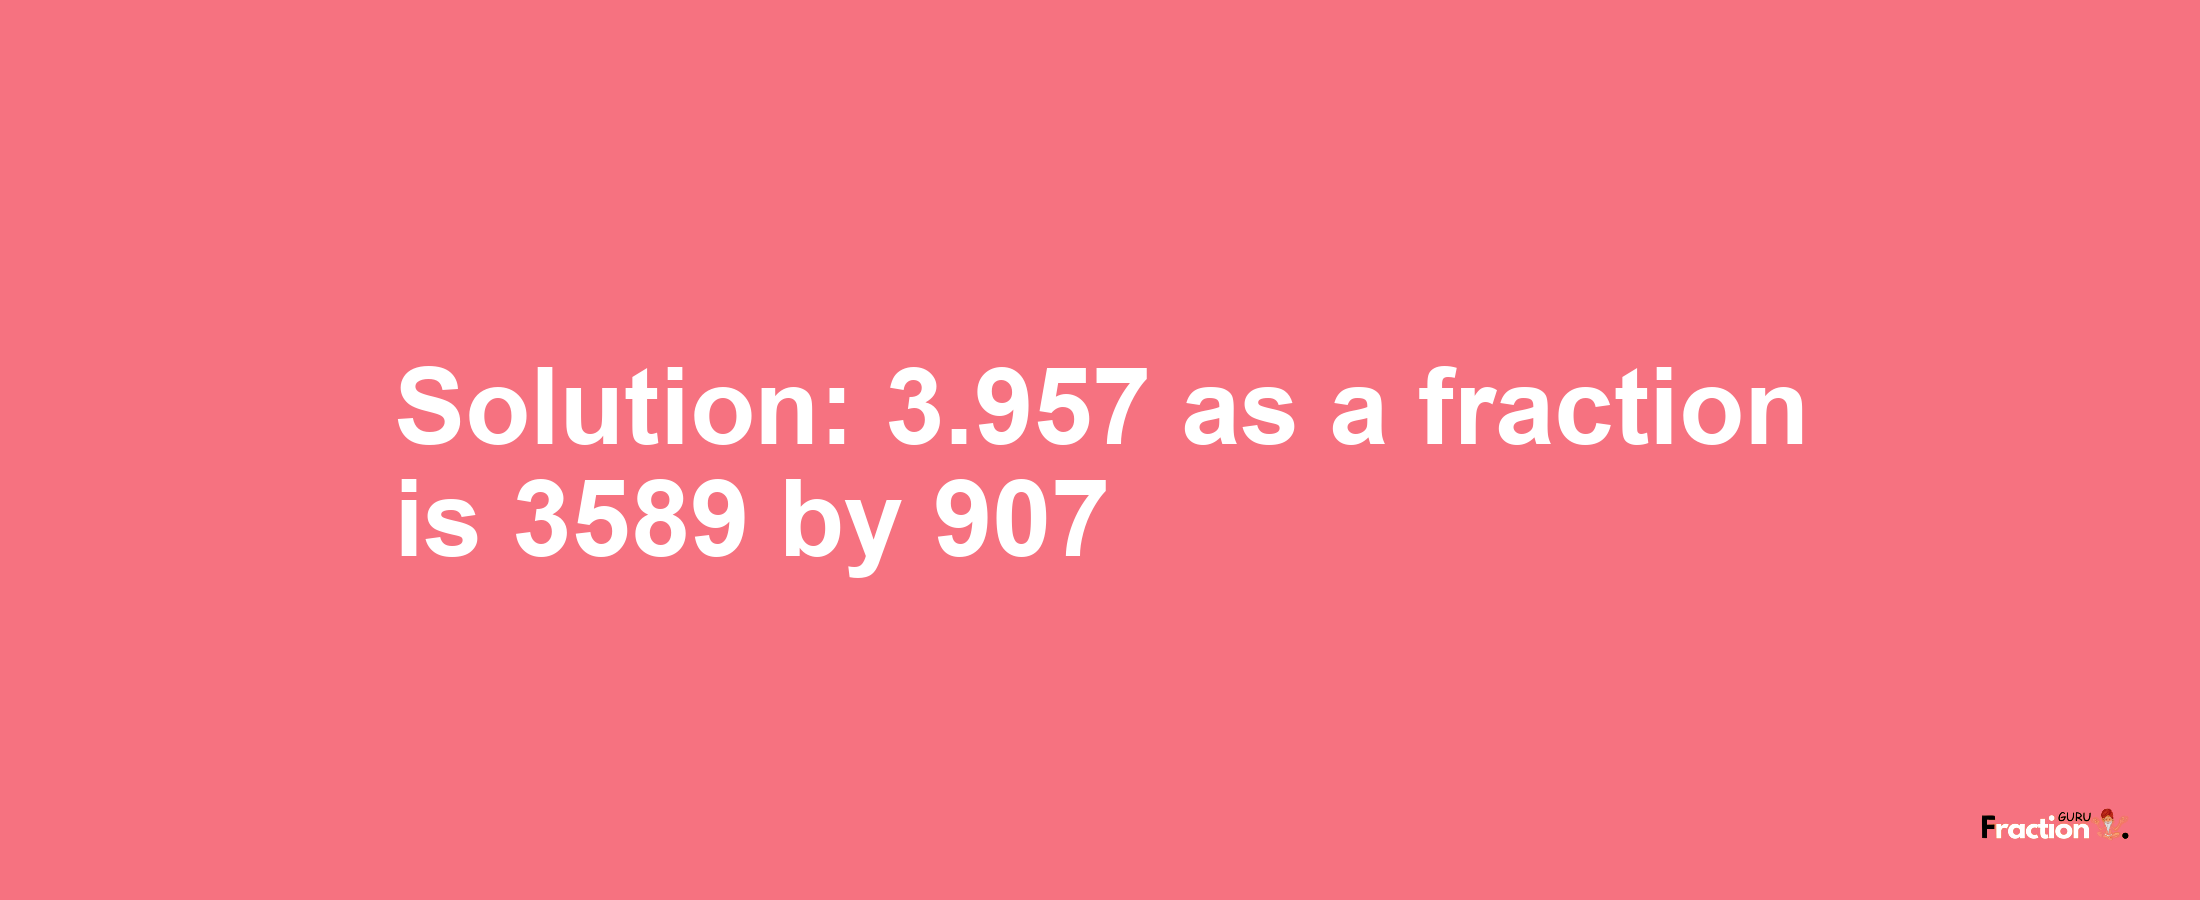 Solution:3.957 as a fraction is 3589/907